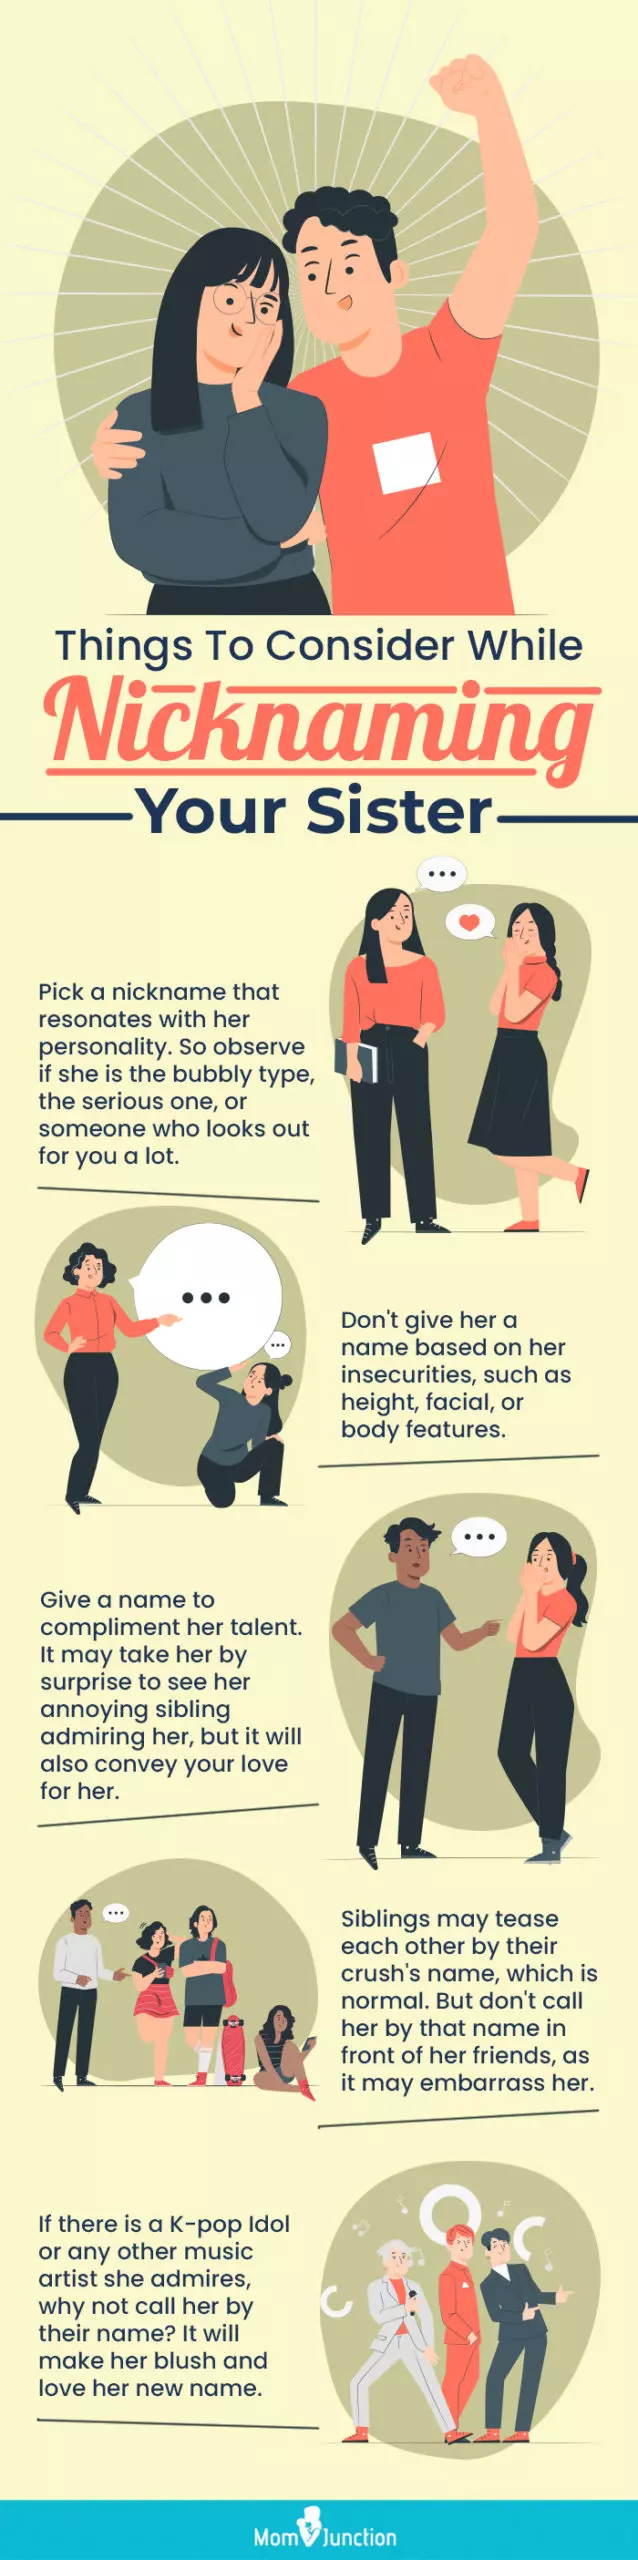 things to consider while nicknaming your sister (infographic)